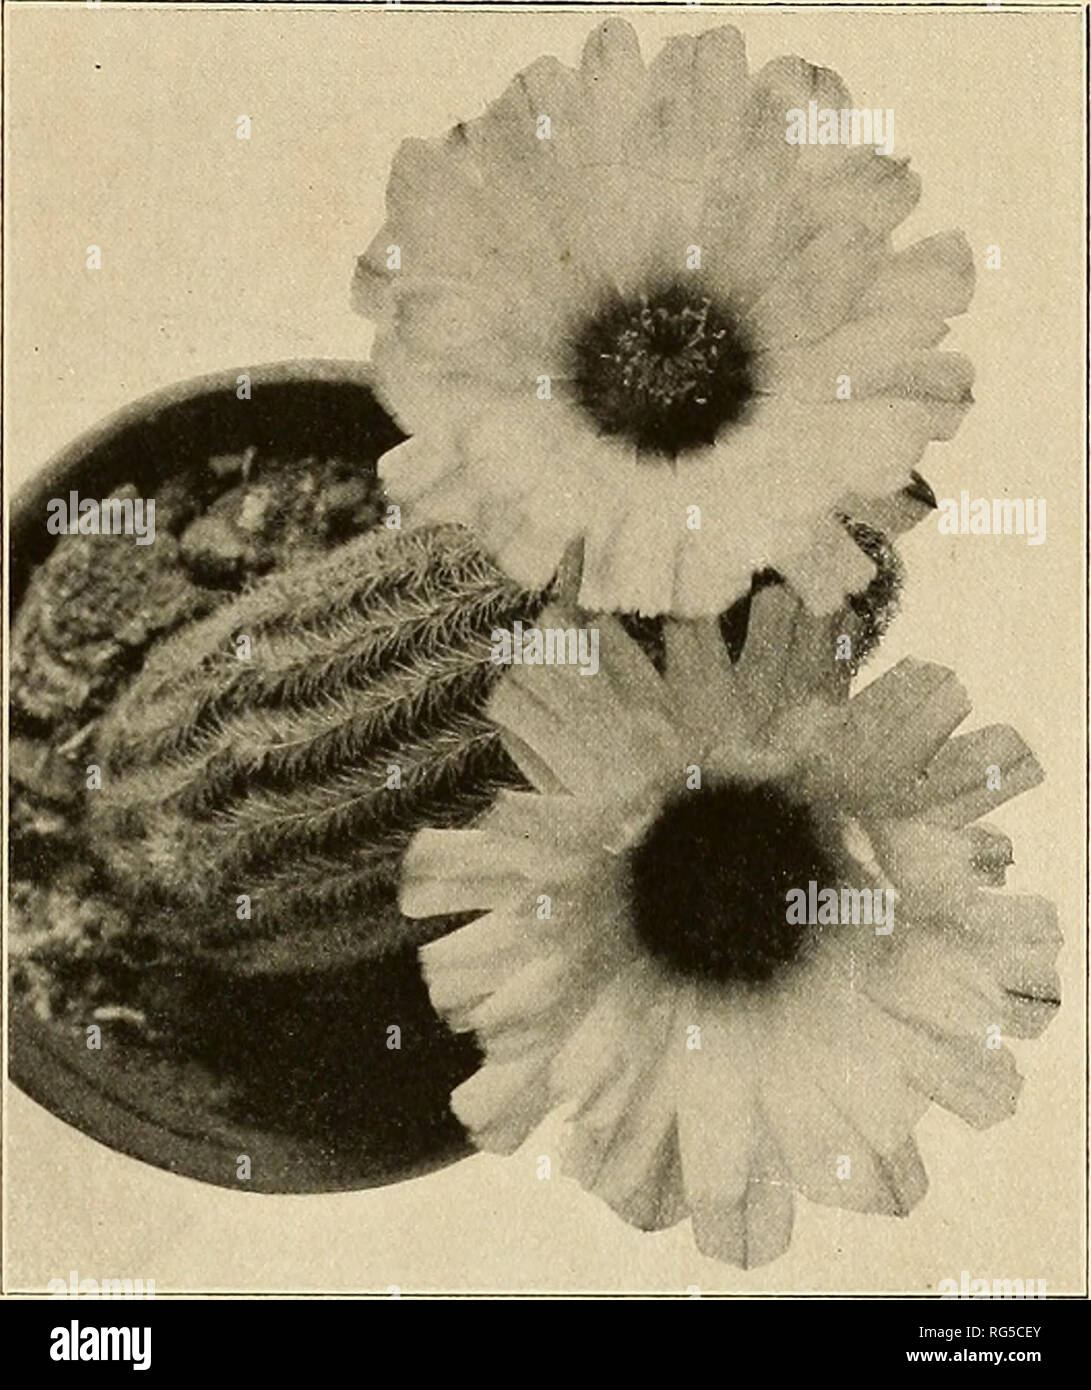 . The Cactaceae : descriptions and illustrations of plants of the cactus family. ECHINOCEREUS. 31 Collected near Guaymas, Mexico, March 10, 1910, by Rose, Standley, and Russell (No. 12570, type), and by Ivan M. Johnston, April 14, 1921 (No. 3103). It also was found as far south as Topolabampo, Sinaloa, March 23, 1910, by Rose, Standley, and Russell (No. 13349) and at San Pedro Bay, Sonora (No. 4291), and at San Carlos Bay, Sonora (No. 4344), by Mr. Johnston in 1921. It is related to E. reichenbachii, but is very distinct from it. Mr. Johnston's No. 3103 flow- ered in Washington, July 22, 1921. Stock Photo